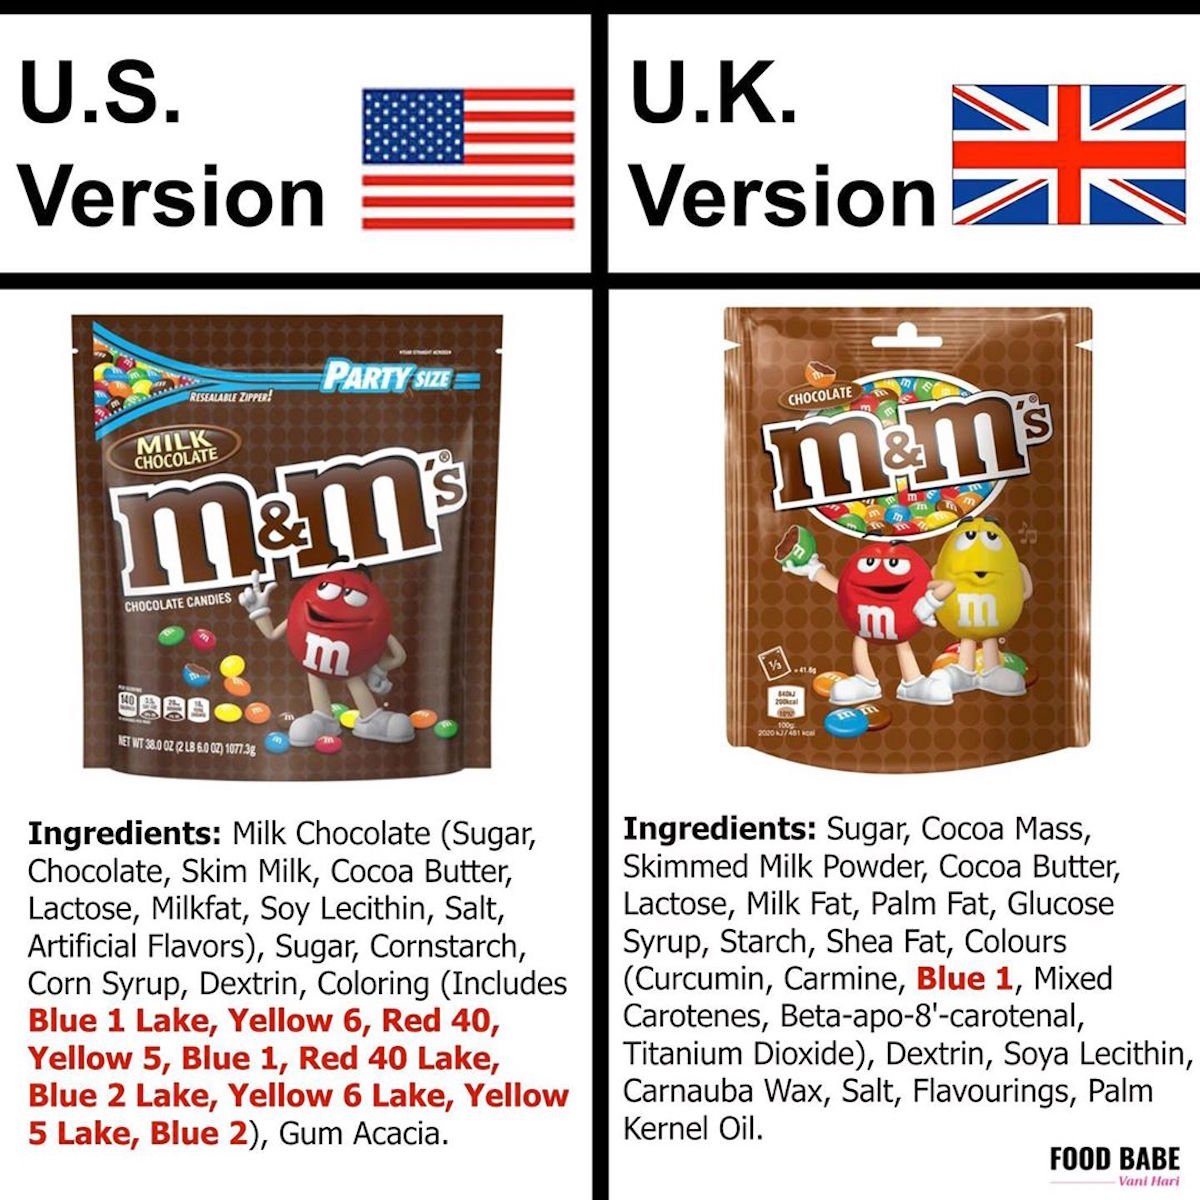 TIL that Crispy M&M's are still available in other countries. They